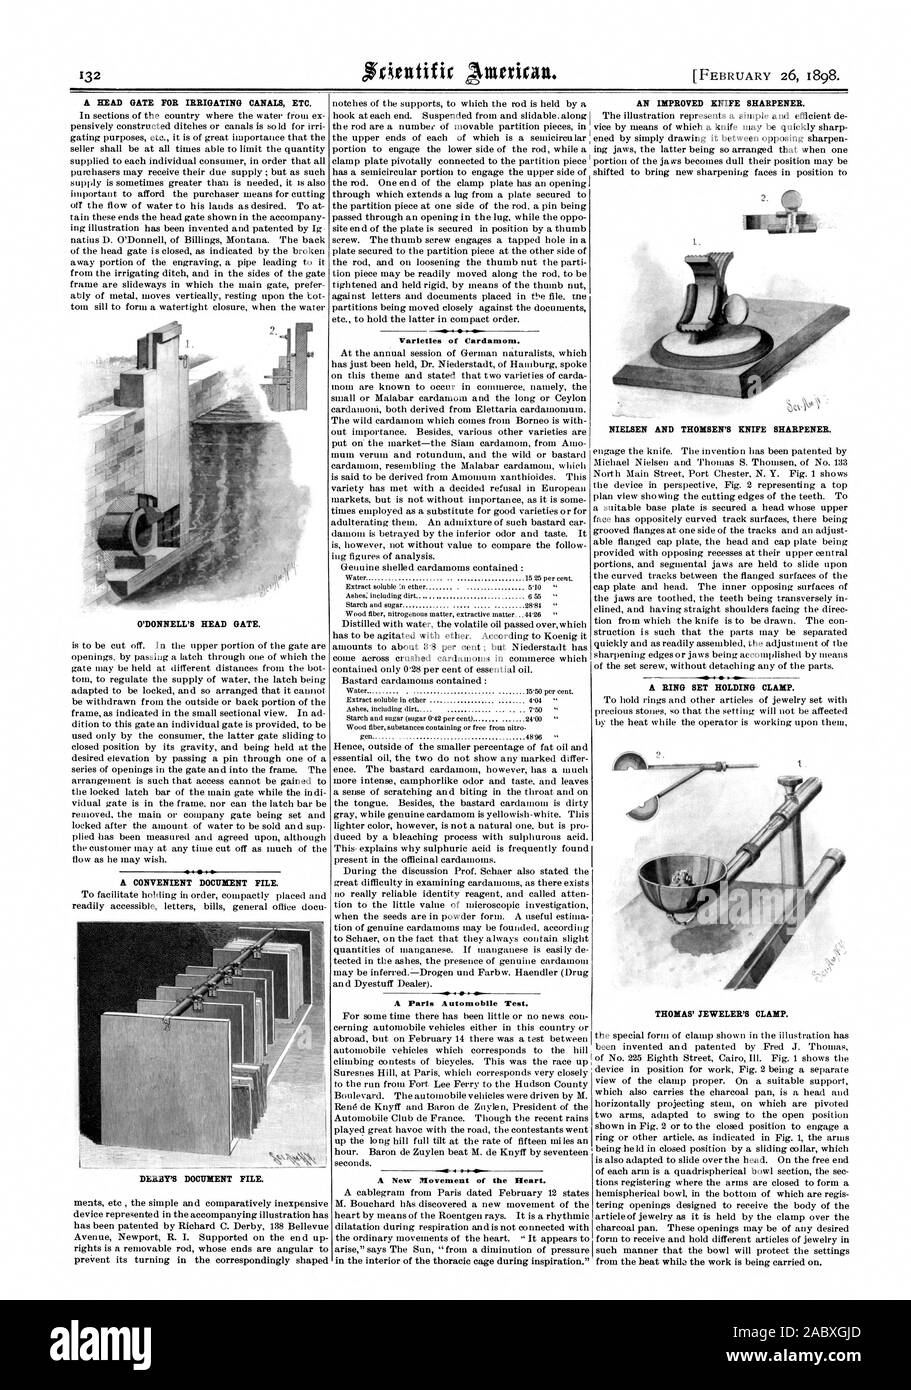 WDONNELL1 HEAD GATE. A CONVENIENT DOCUMENT FILE. DERBY'S DOCUMENT FILE. Varieties of Cardamom. A Paris Automobile Test. A New Movement of the Heart. AN IMPROVED KNIFE SHARPENER. NIELSEN AND THOMSEN'S KNIFE SHARPENER. A RING SET HOLDING CLAMP. THOMAS' JEWELER'S CLAMP., scientific american, 1898-02-26 Stock Photo